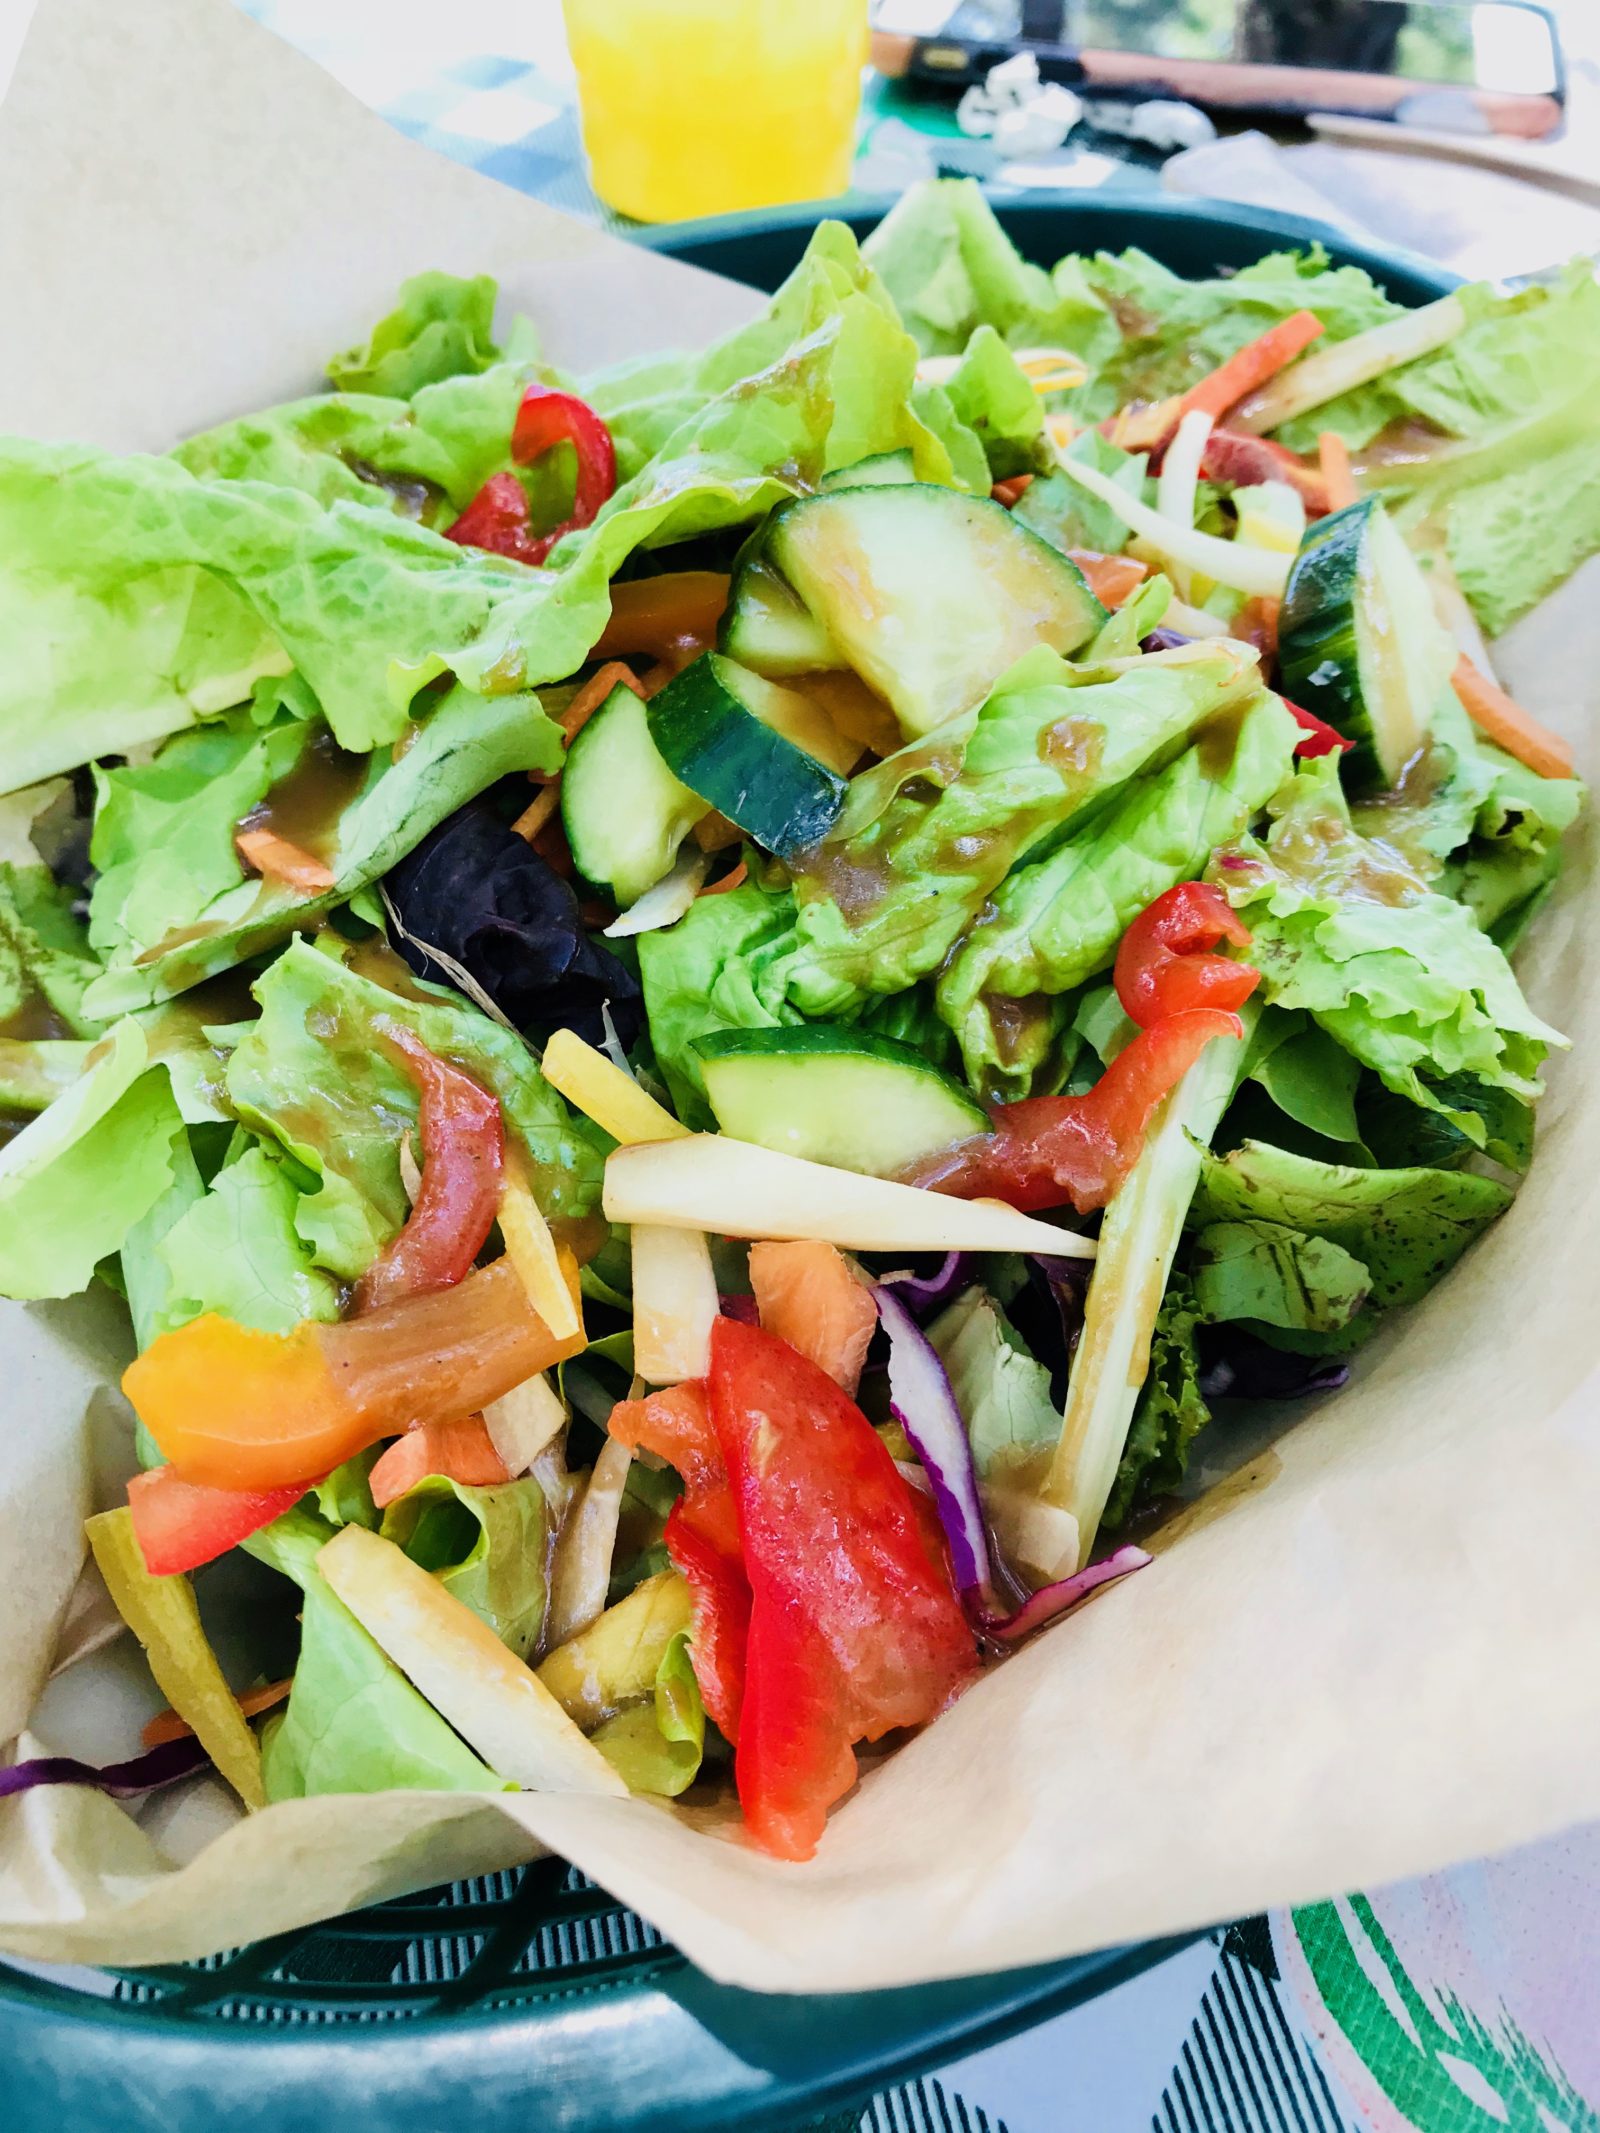 Pick of the Week - Harvest Grill and Greens at James Ranch - Large Beautiful Garden Salad